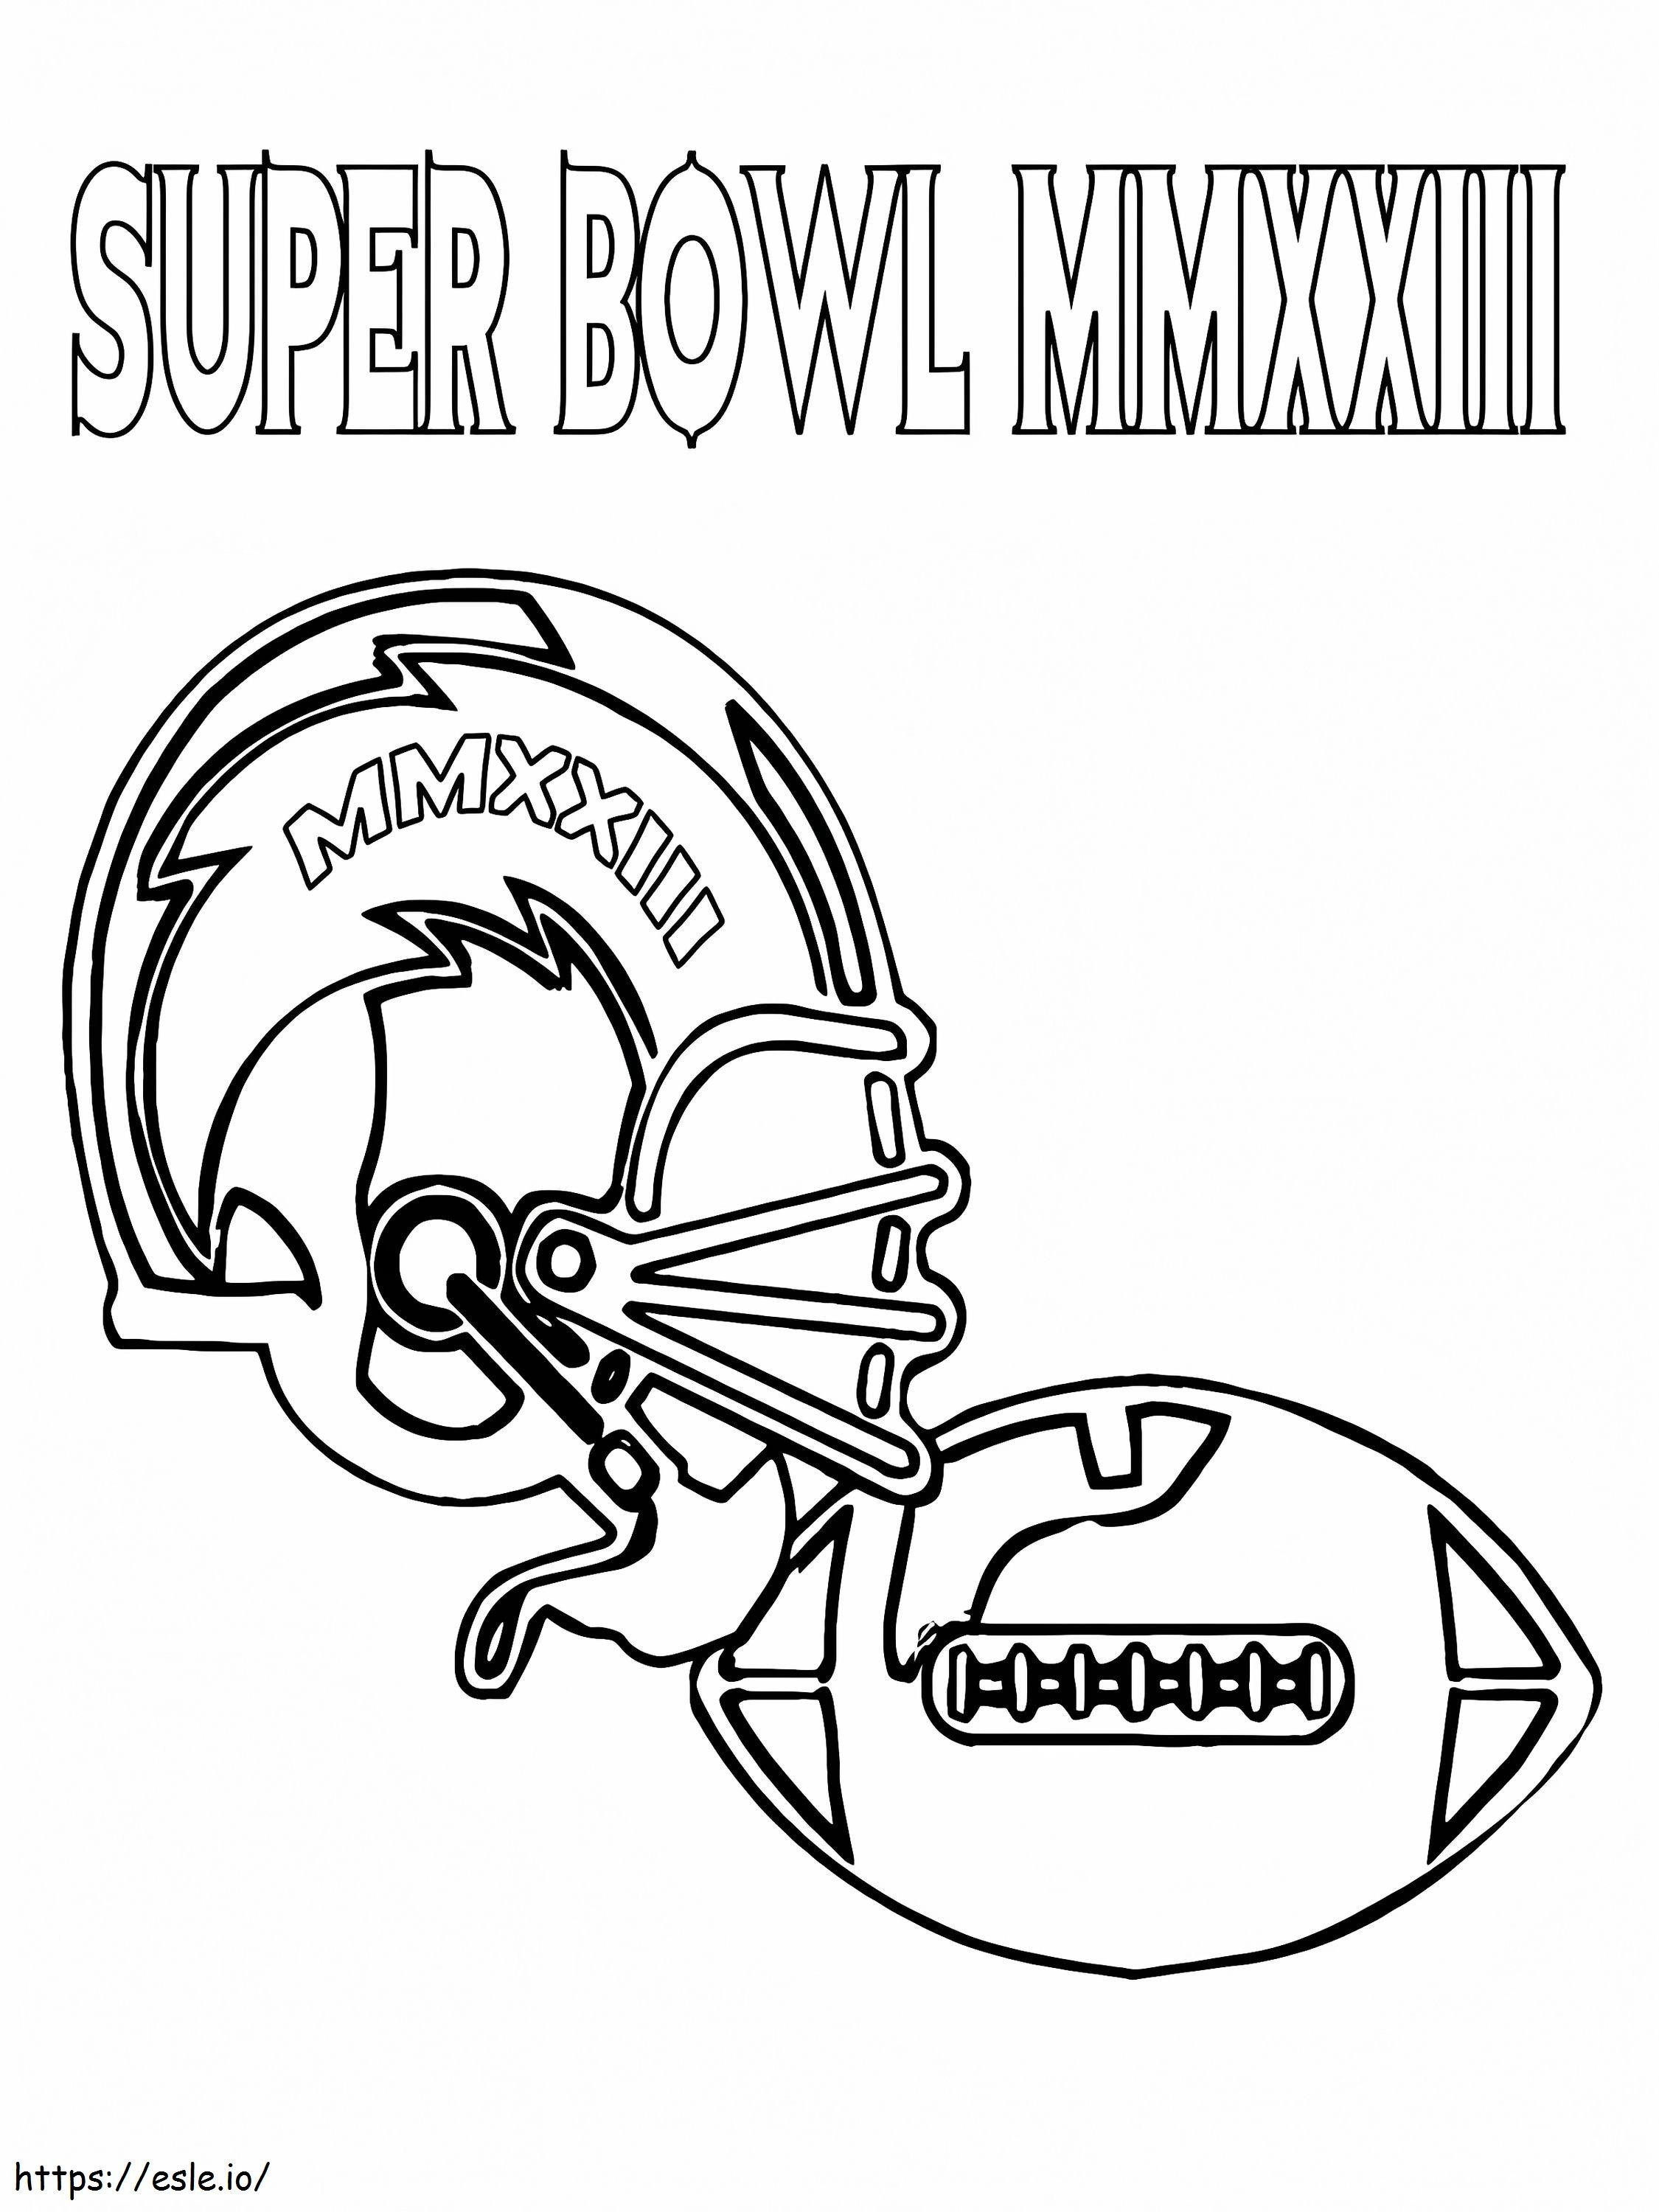 Super Bowl Football Helmet And Ball coloring page